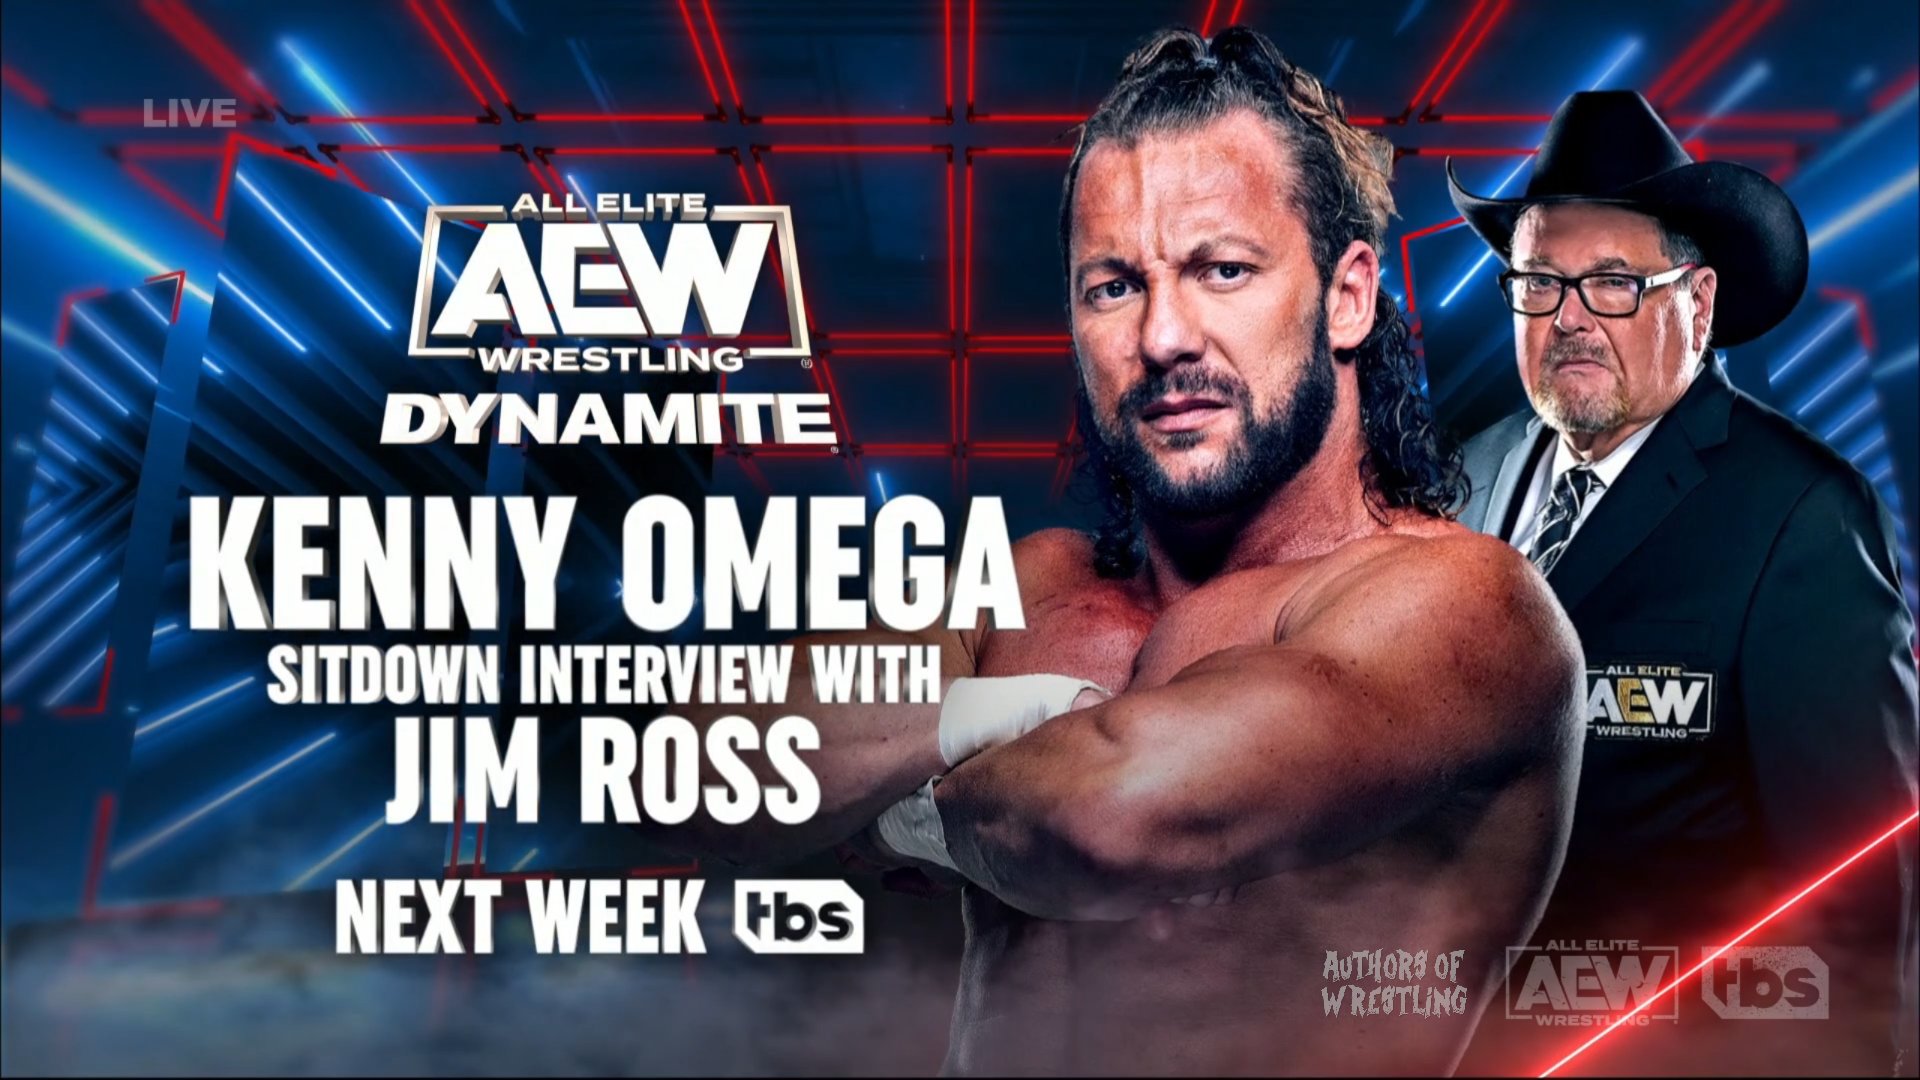 Early Lineup Announced For August 16th AEW Dynamite